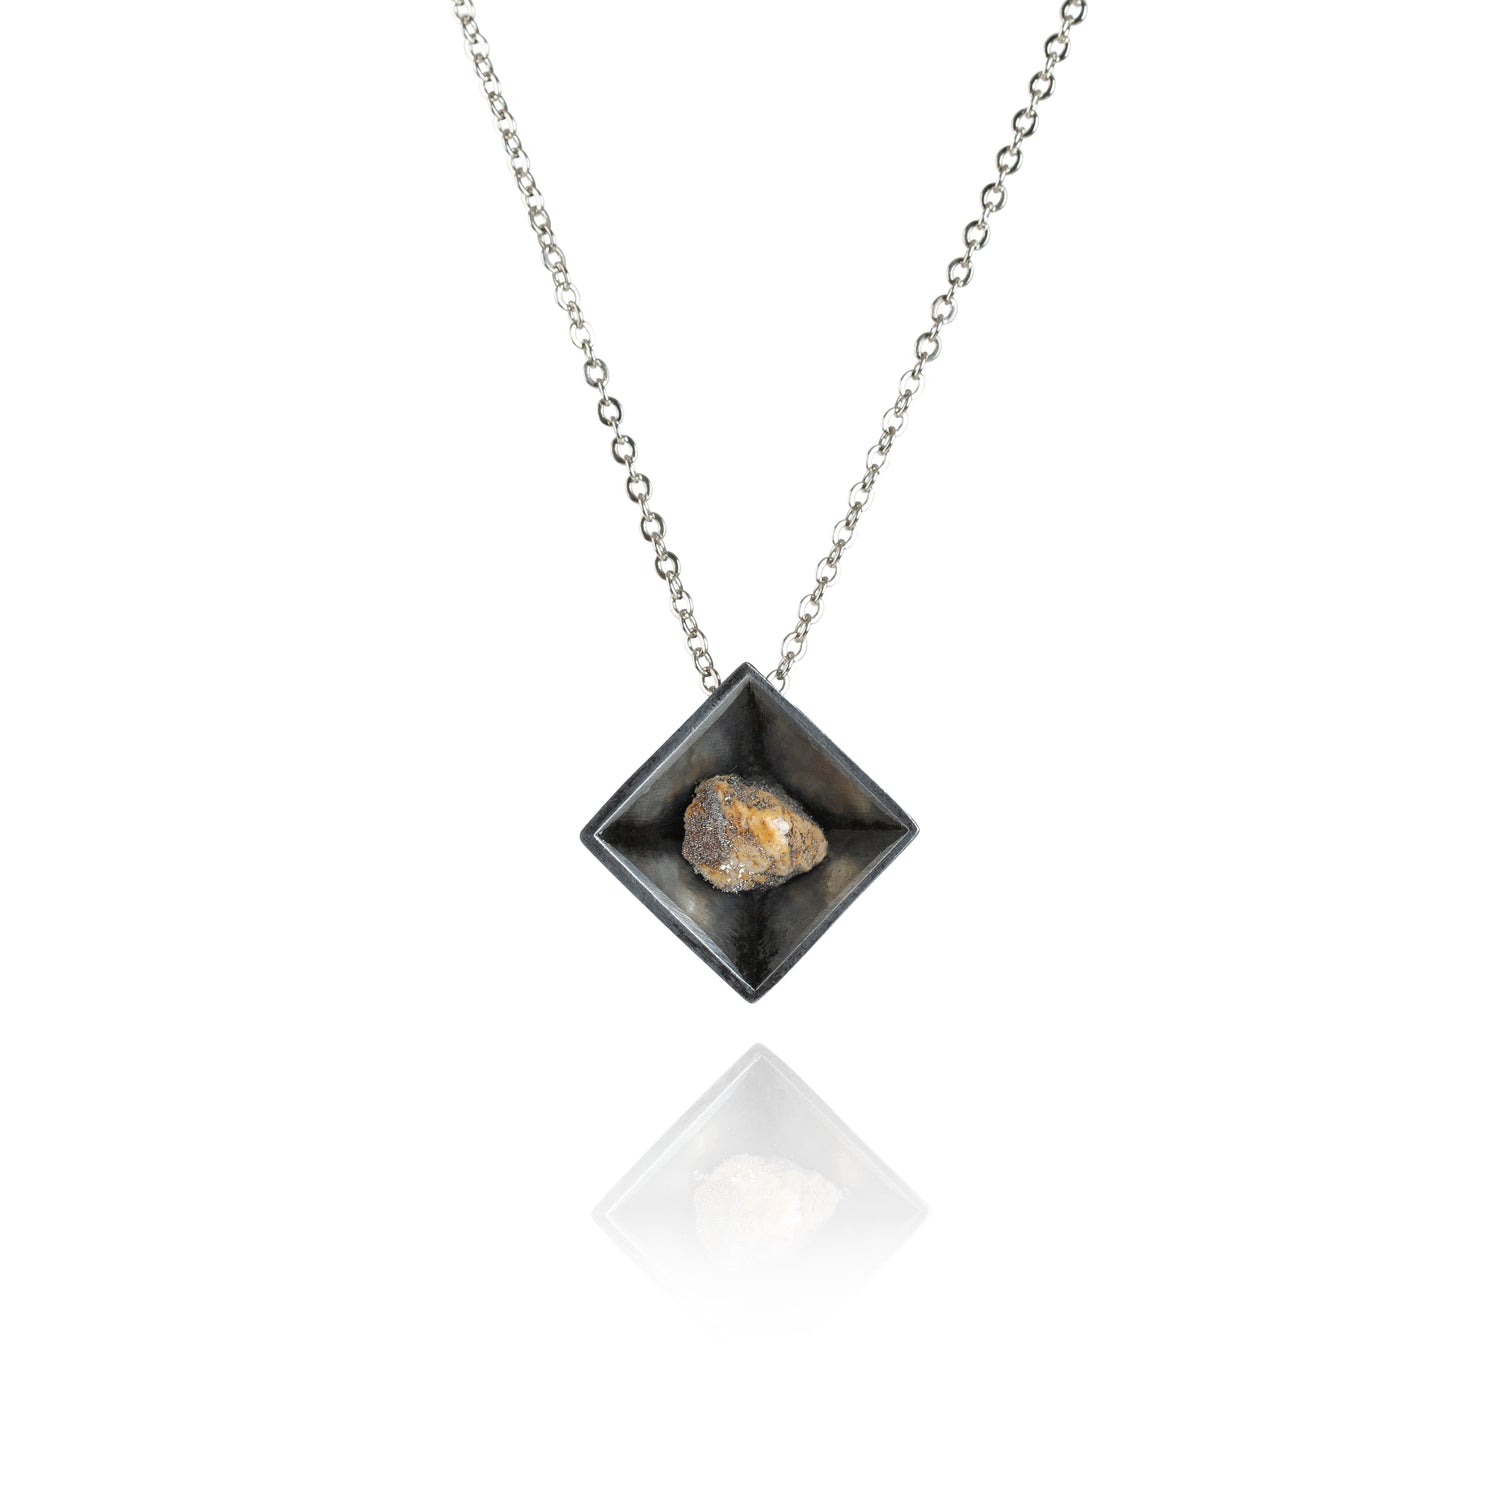 A small natural multicolored stone sitting in the middle of a diamond shaped metal pendant in a dark silver color. The pendant is hanging on silver chain.